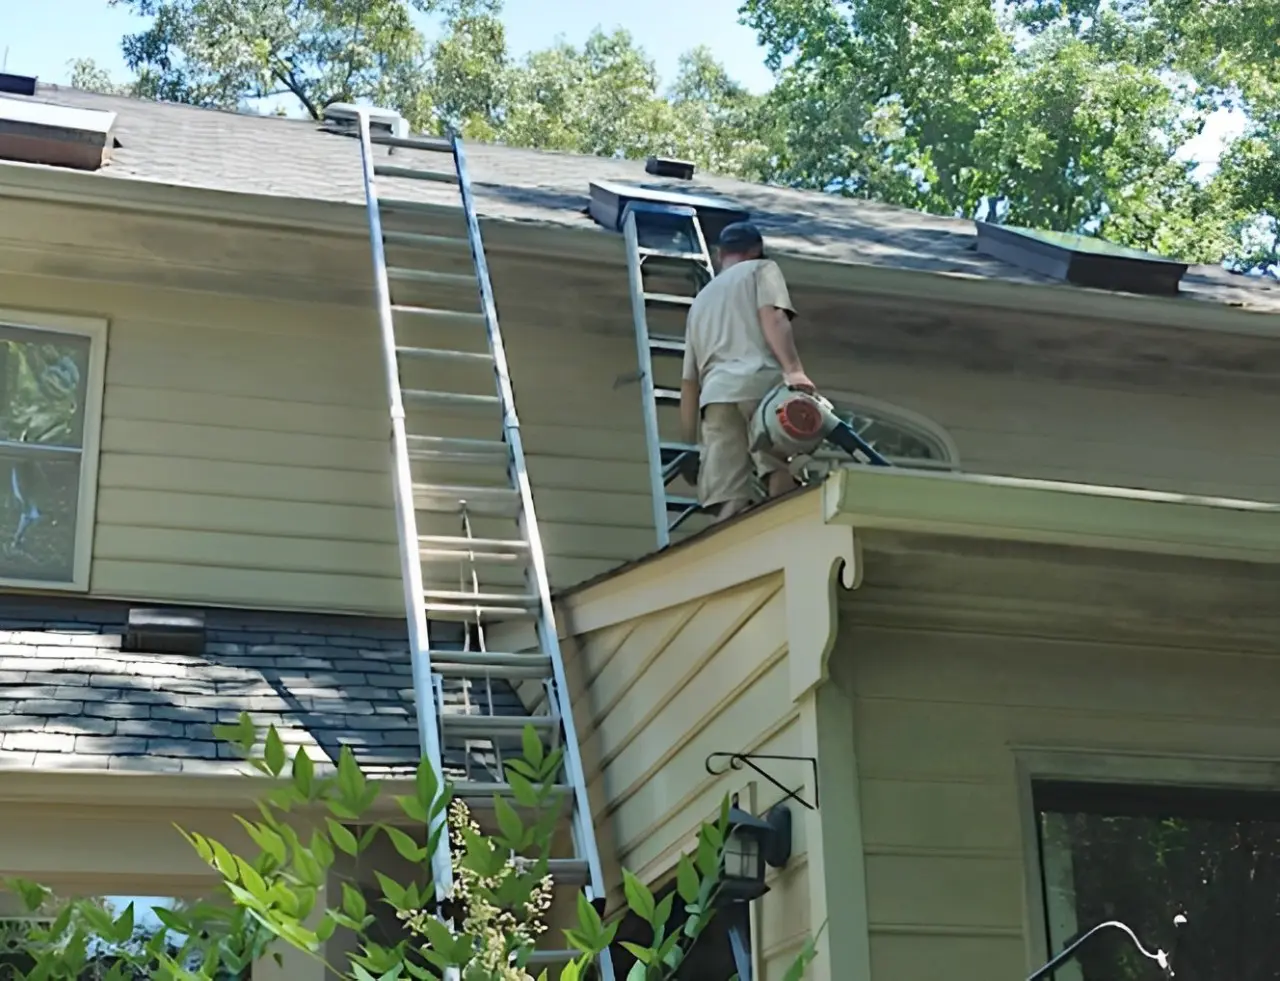 A man on the roof of a house with a ladder.